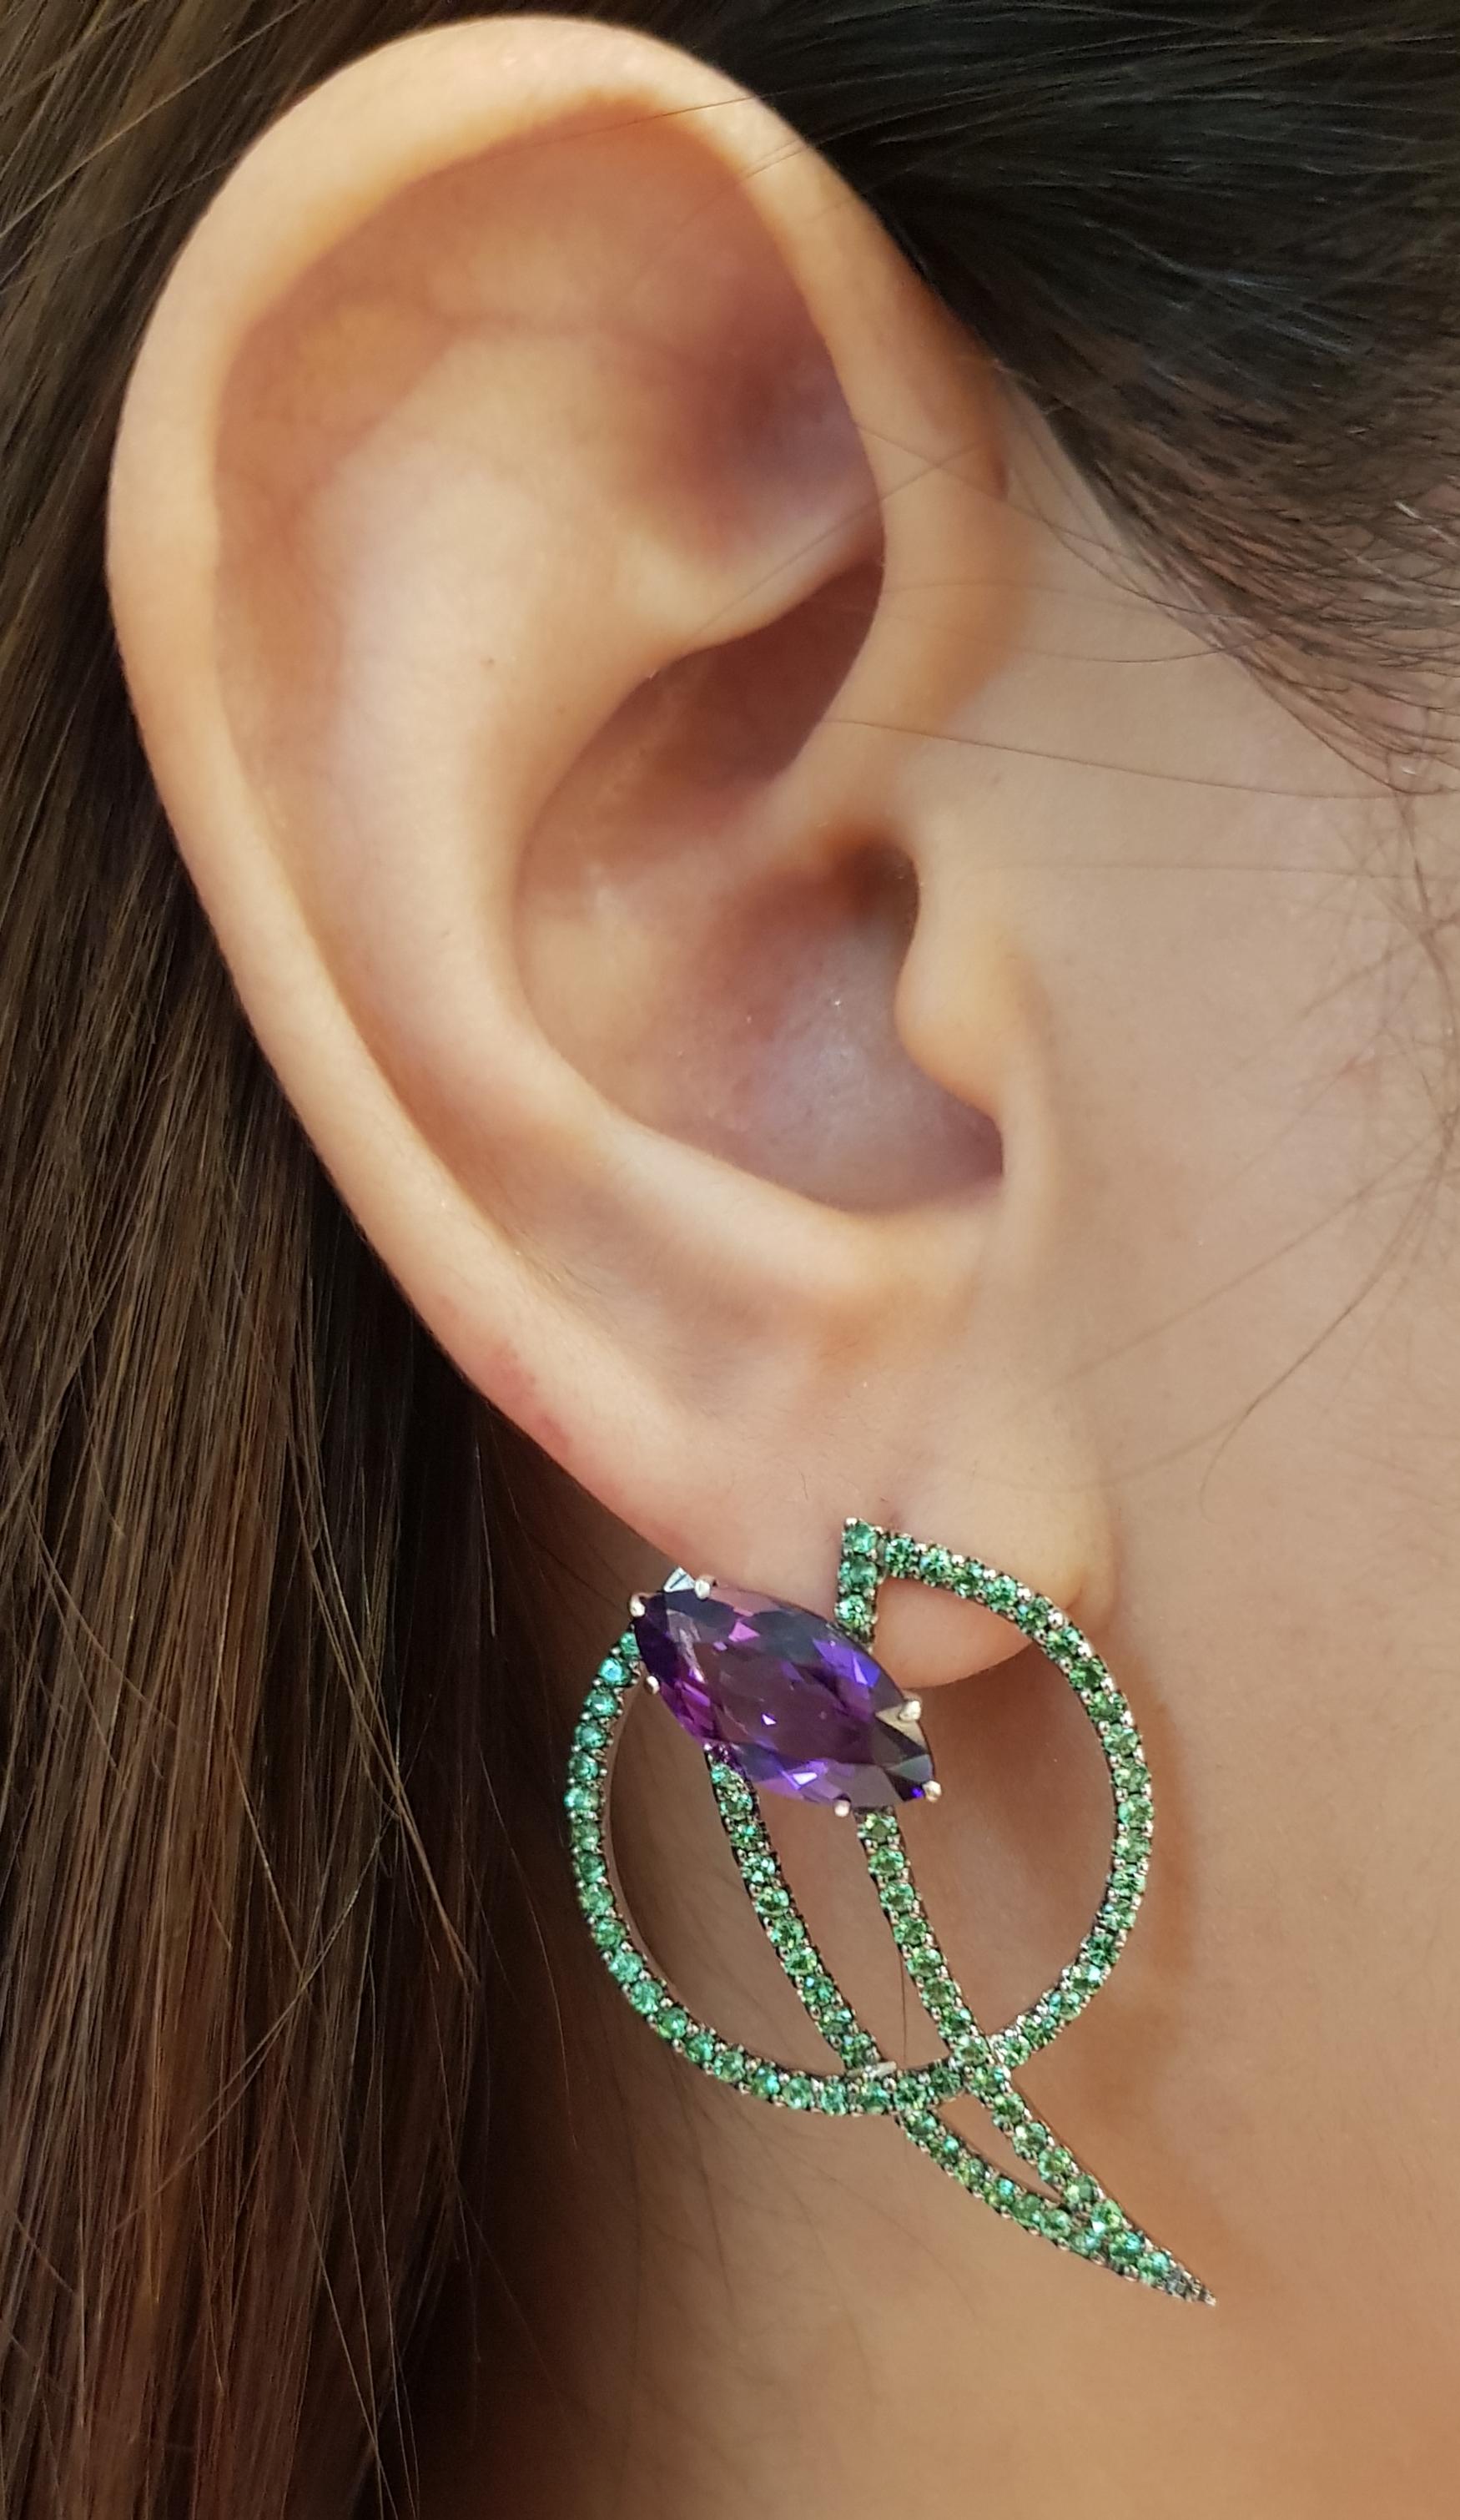 Amethyst 4.76 carats with Tsavorite 1.90 carats Earrings set in 18 Karat White Gold Settings by Kavant & Sharart

Width:  2.5 cm 
Length:  3.9 cm
Total Weight: 11.36 grams

